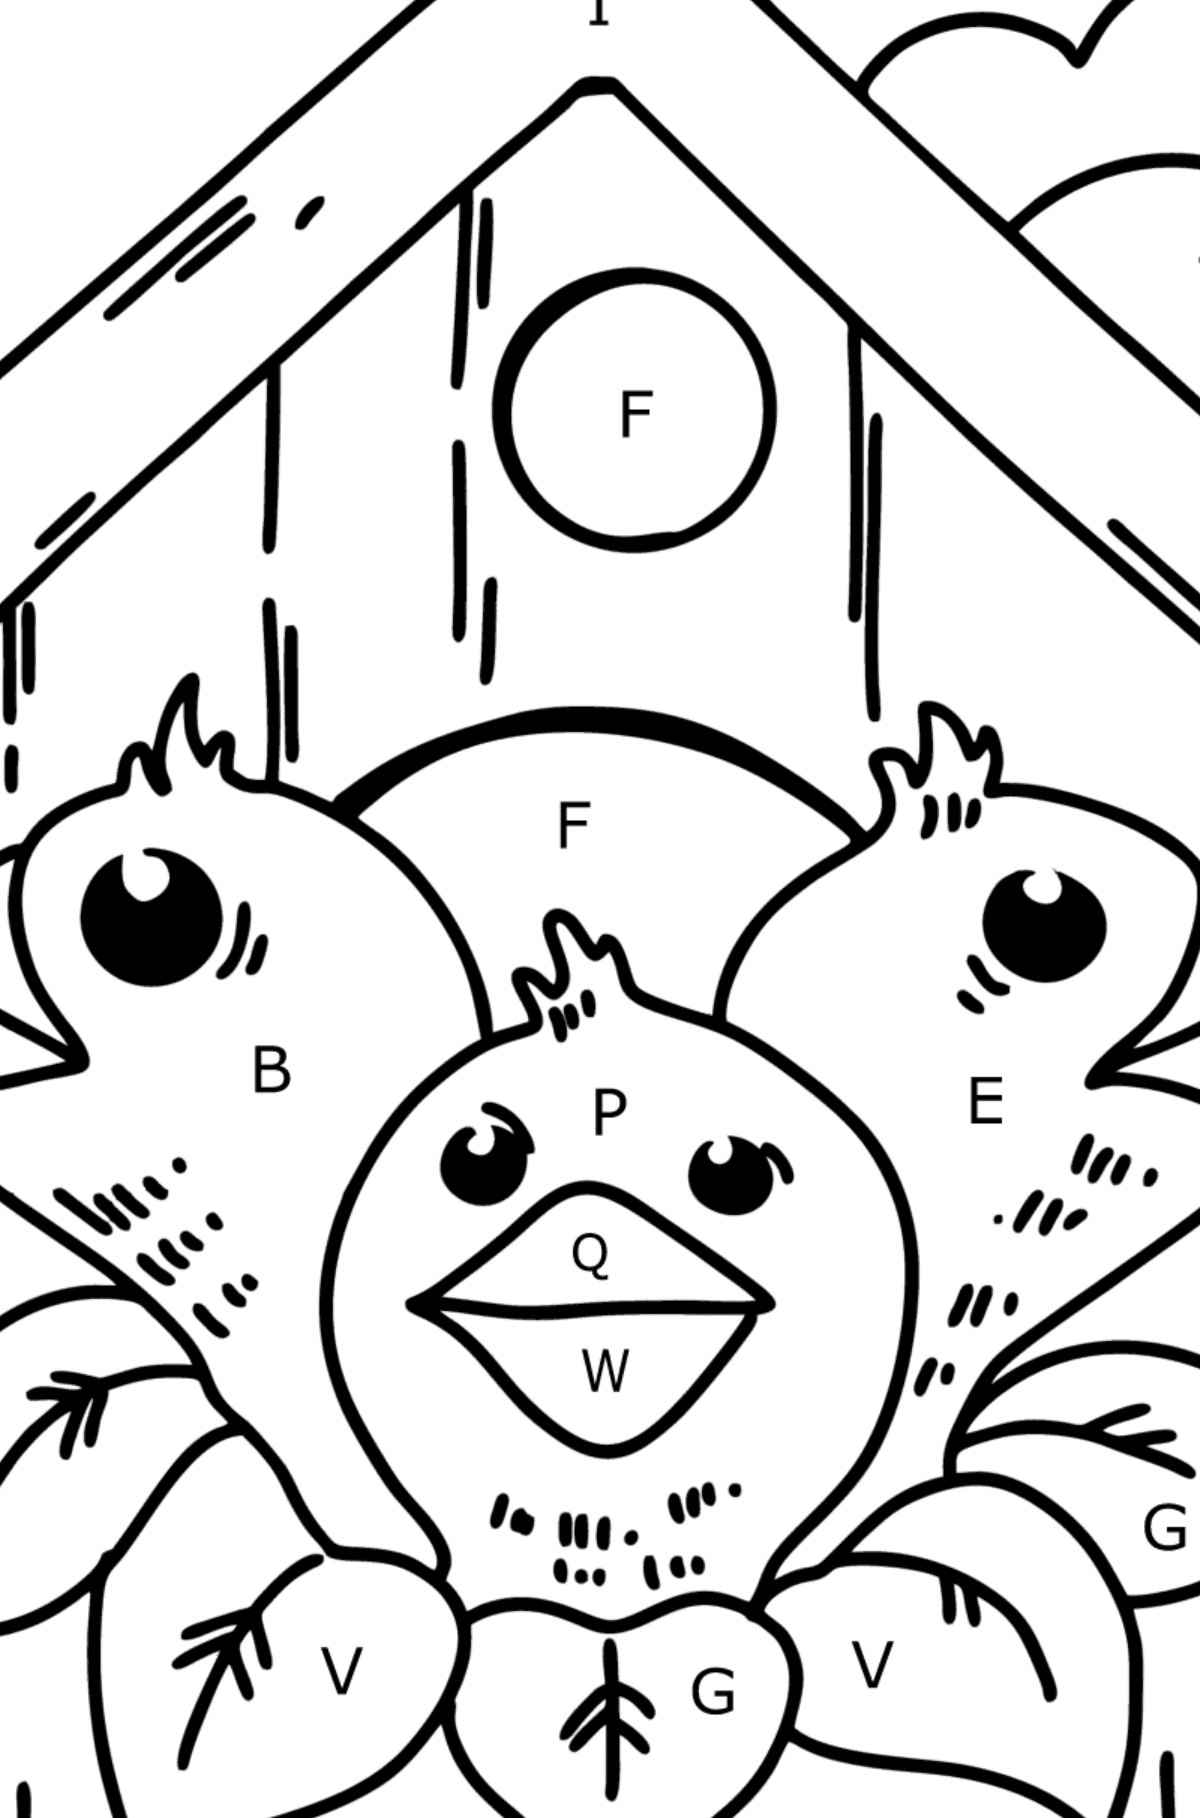 Chicks in a Birdhouse coloring page - Coloring by Letters for Kids